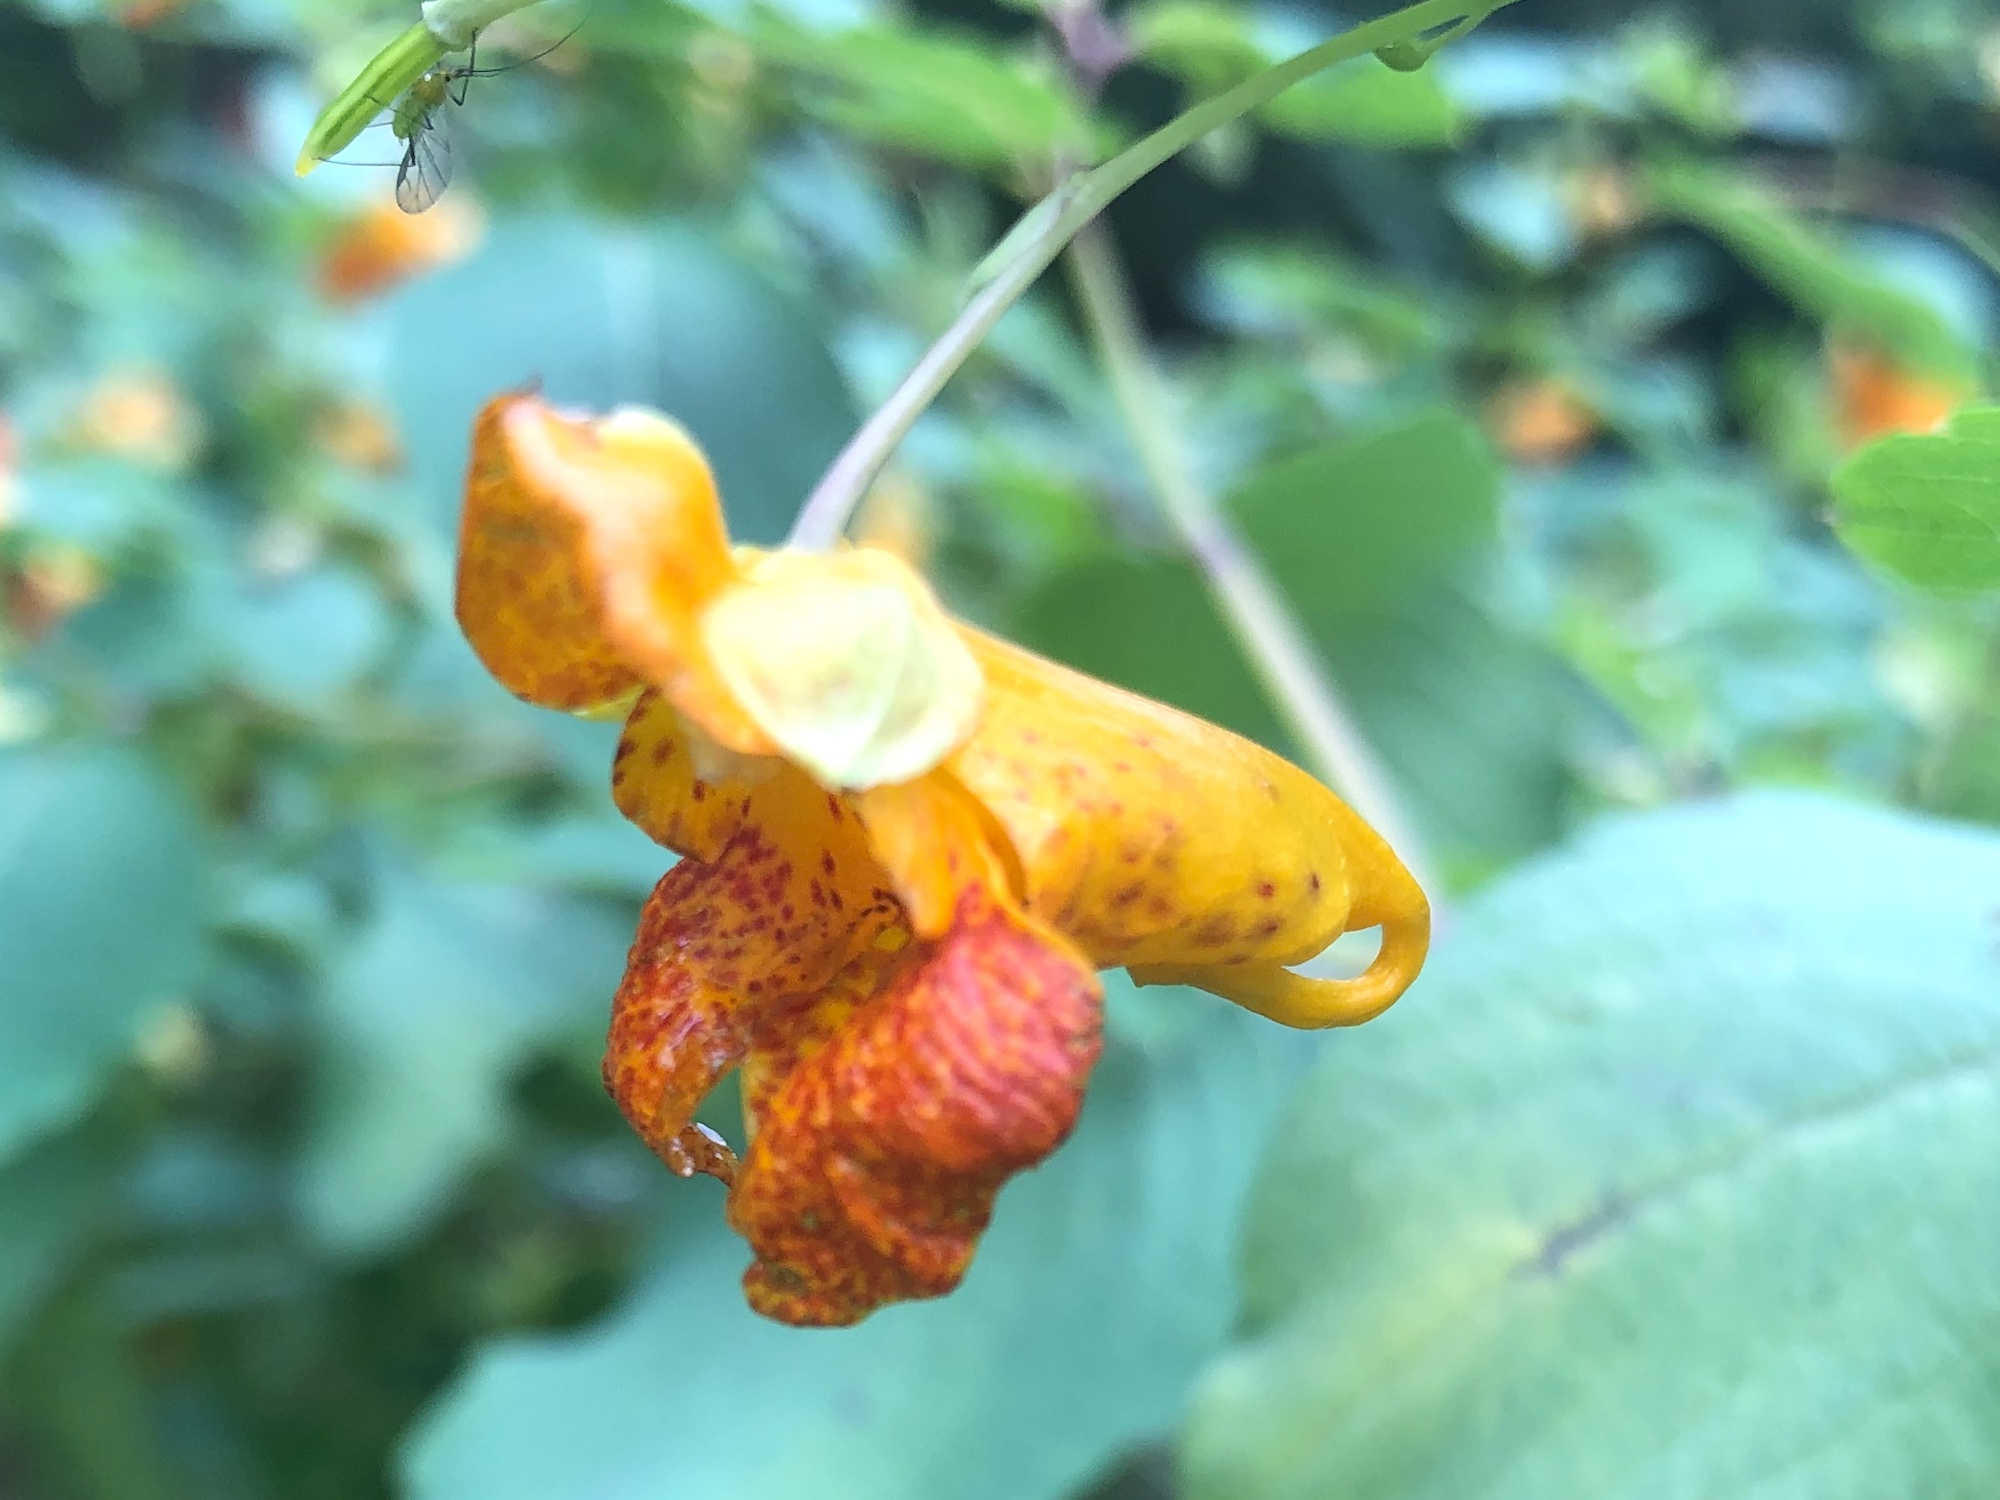 Spotted Jewelweed in Nakoma Park on August 11, 2019.